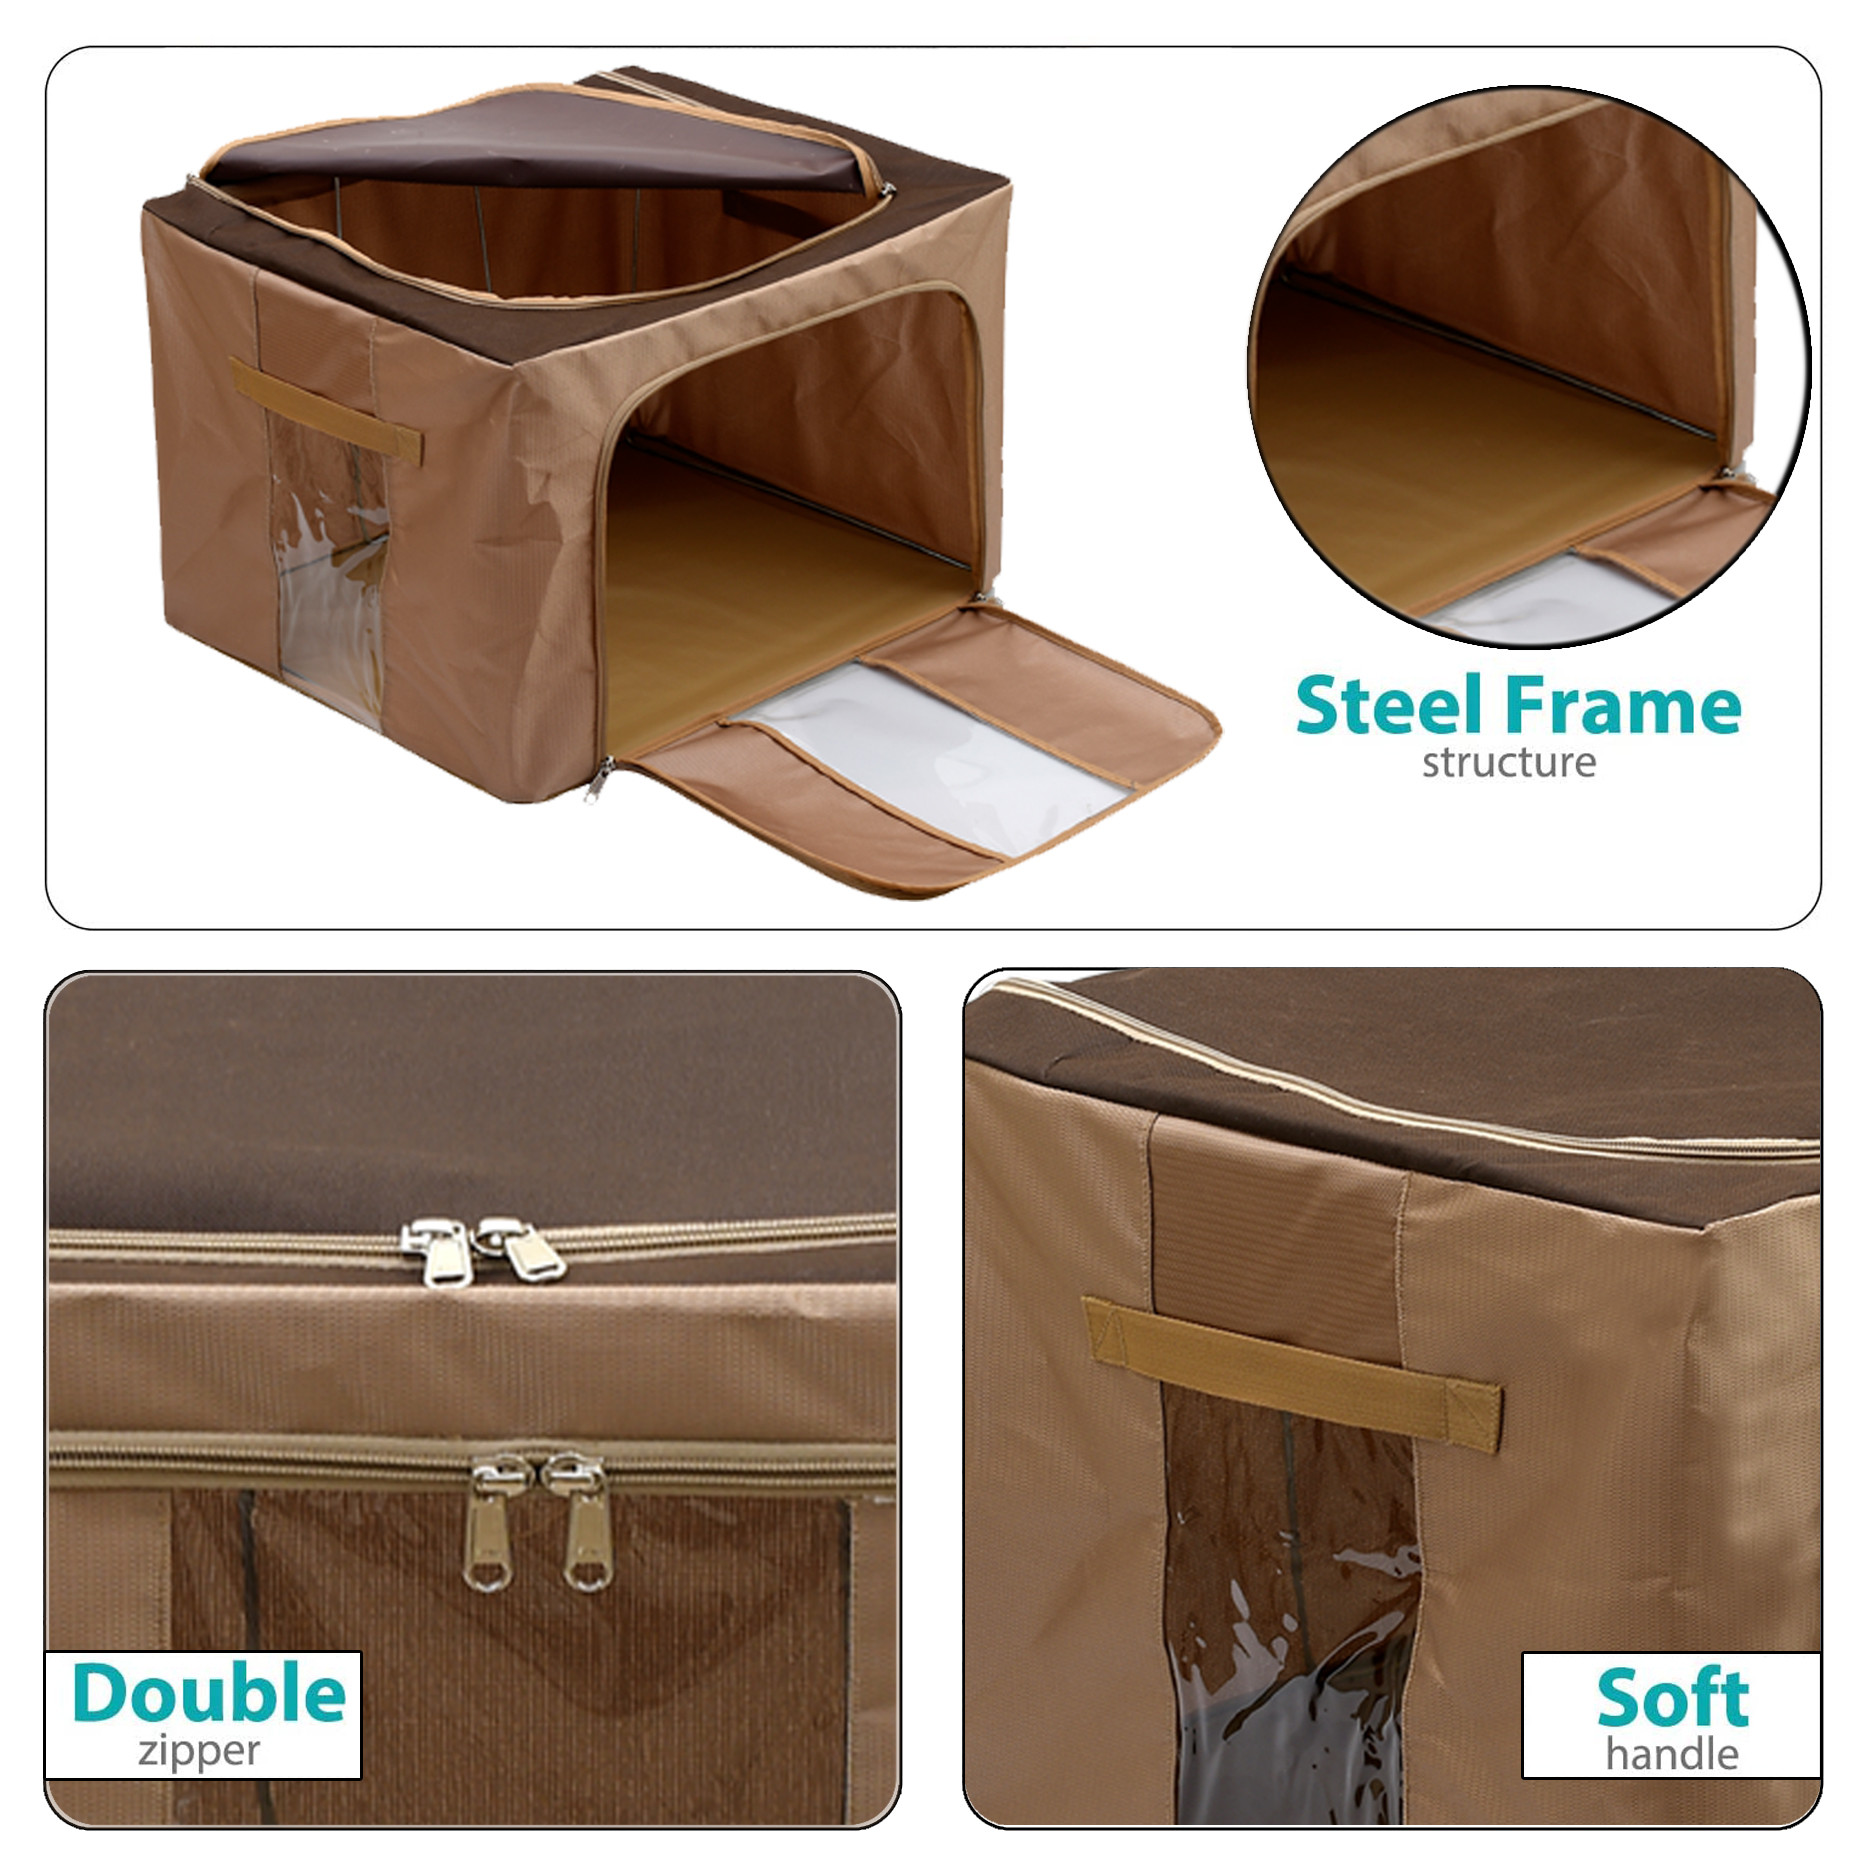 Kuber Industries Steel Frame Storage Box/Organizer For Clothing, Blankets, Bedding With Clear Window, 44Ltr. (Brown)-44KM0293